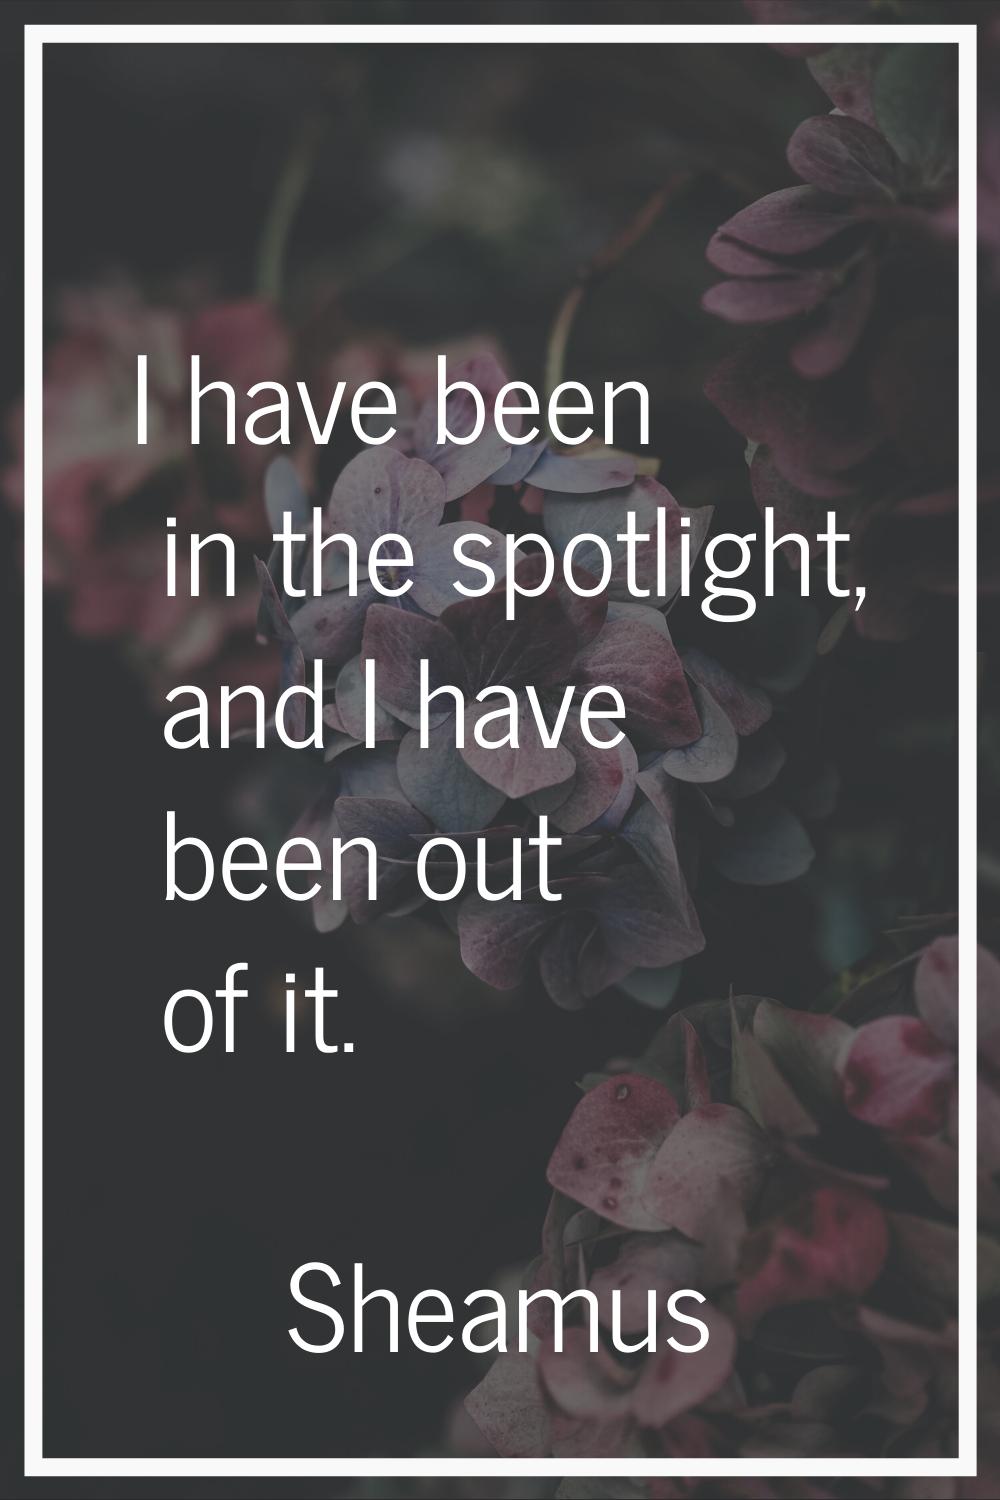 I have been in the spotlight, and I have been out of it.